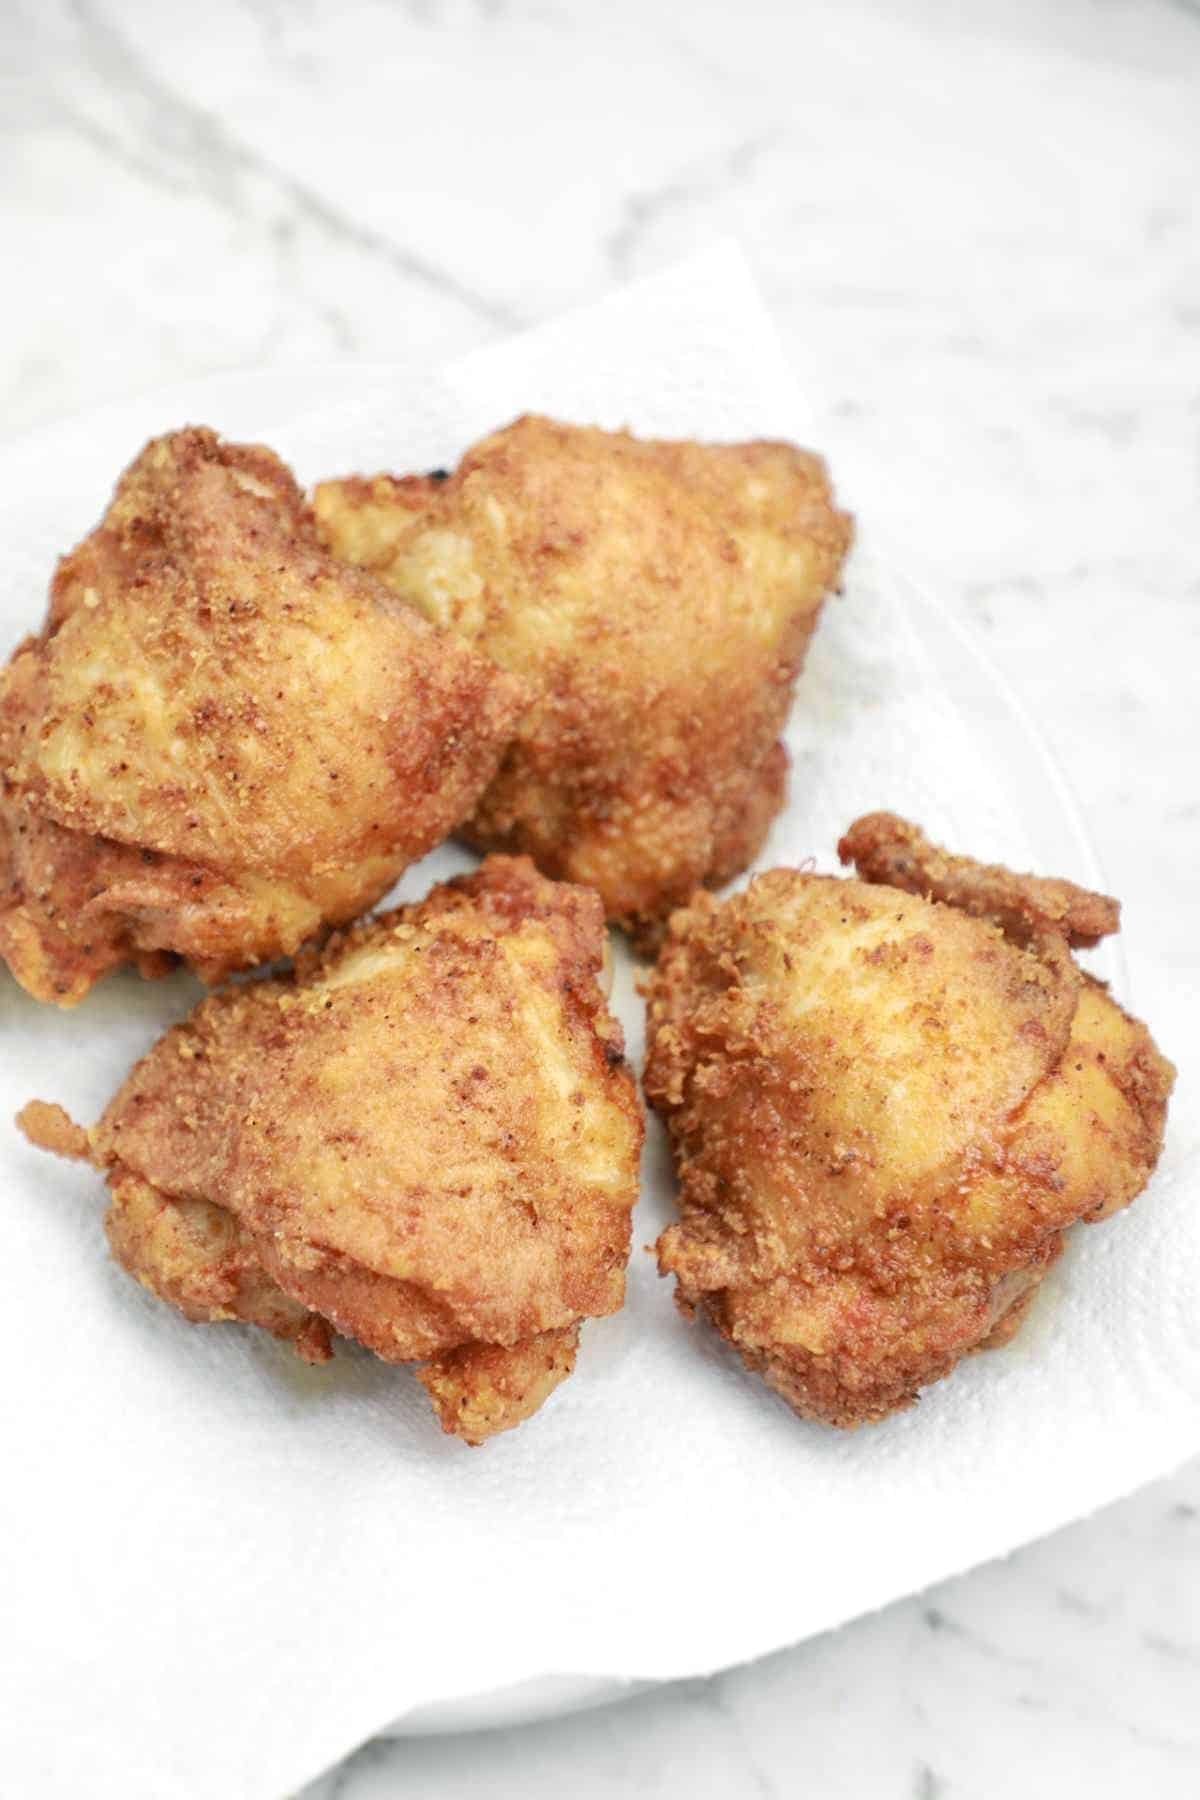 Place fried chicken thighs on a plate.